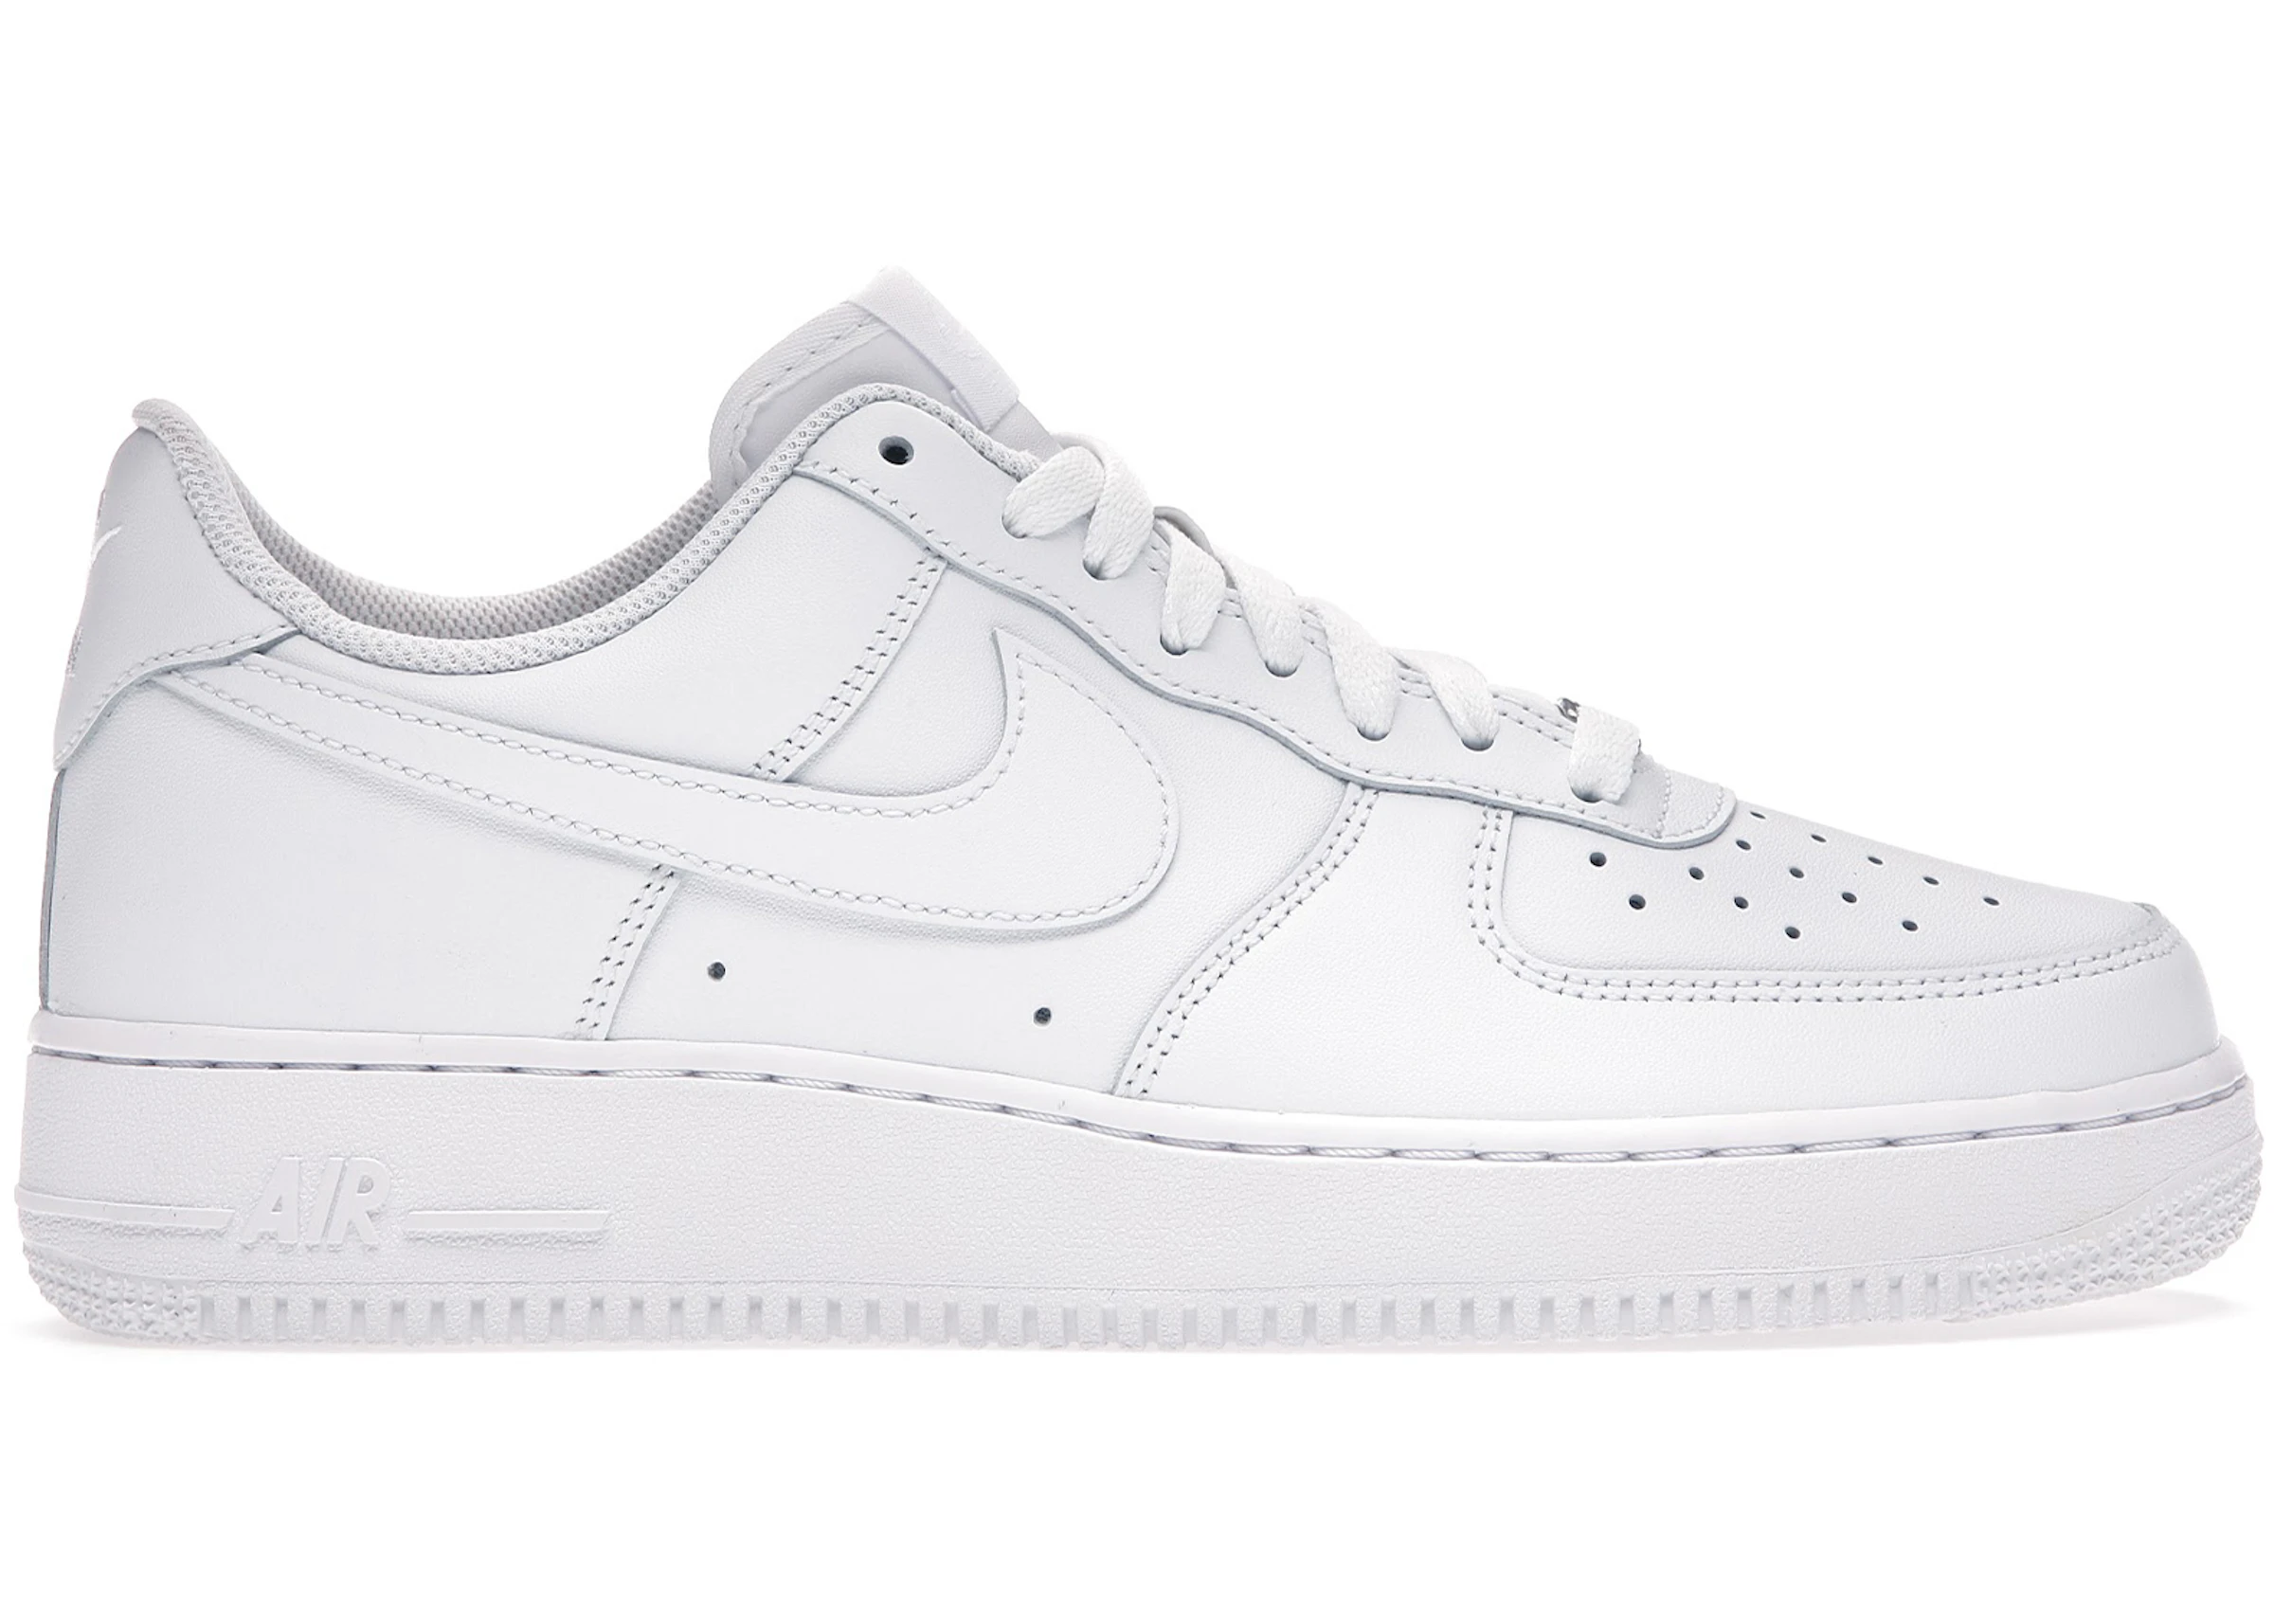 Ligation one Decision Buy Nike Air Force 1 - Low White